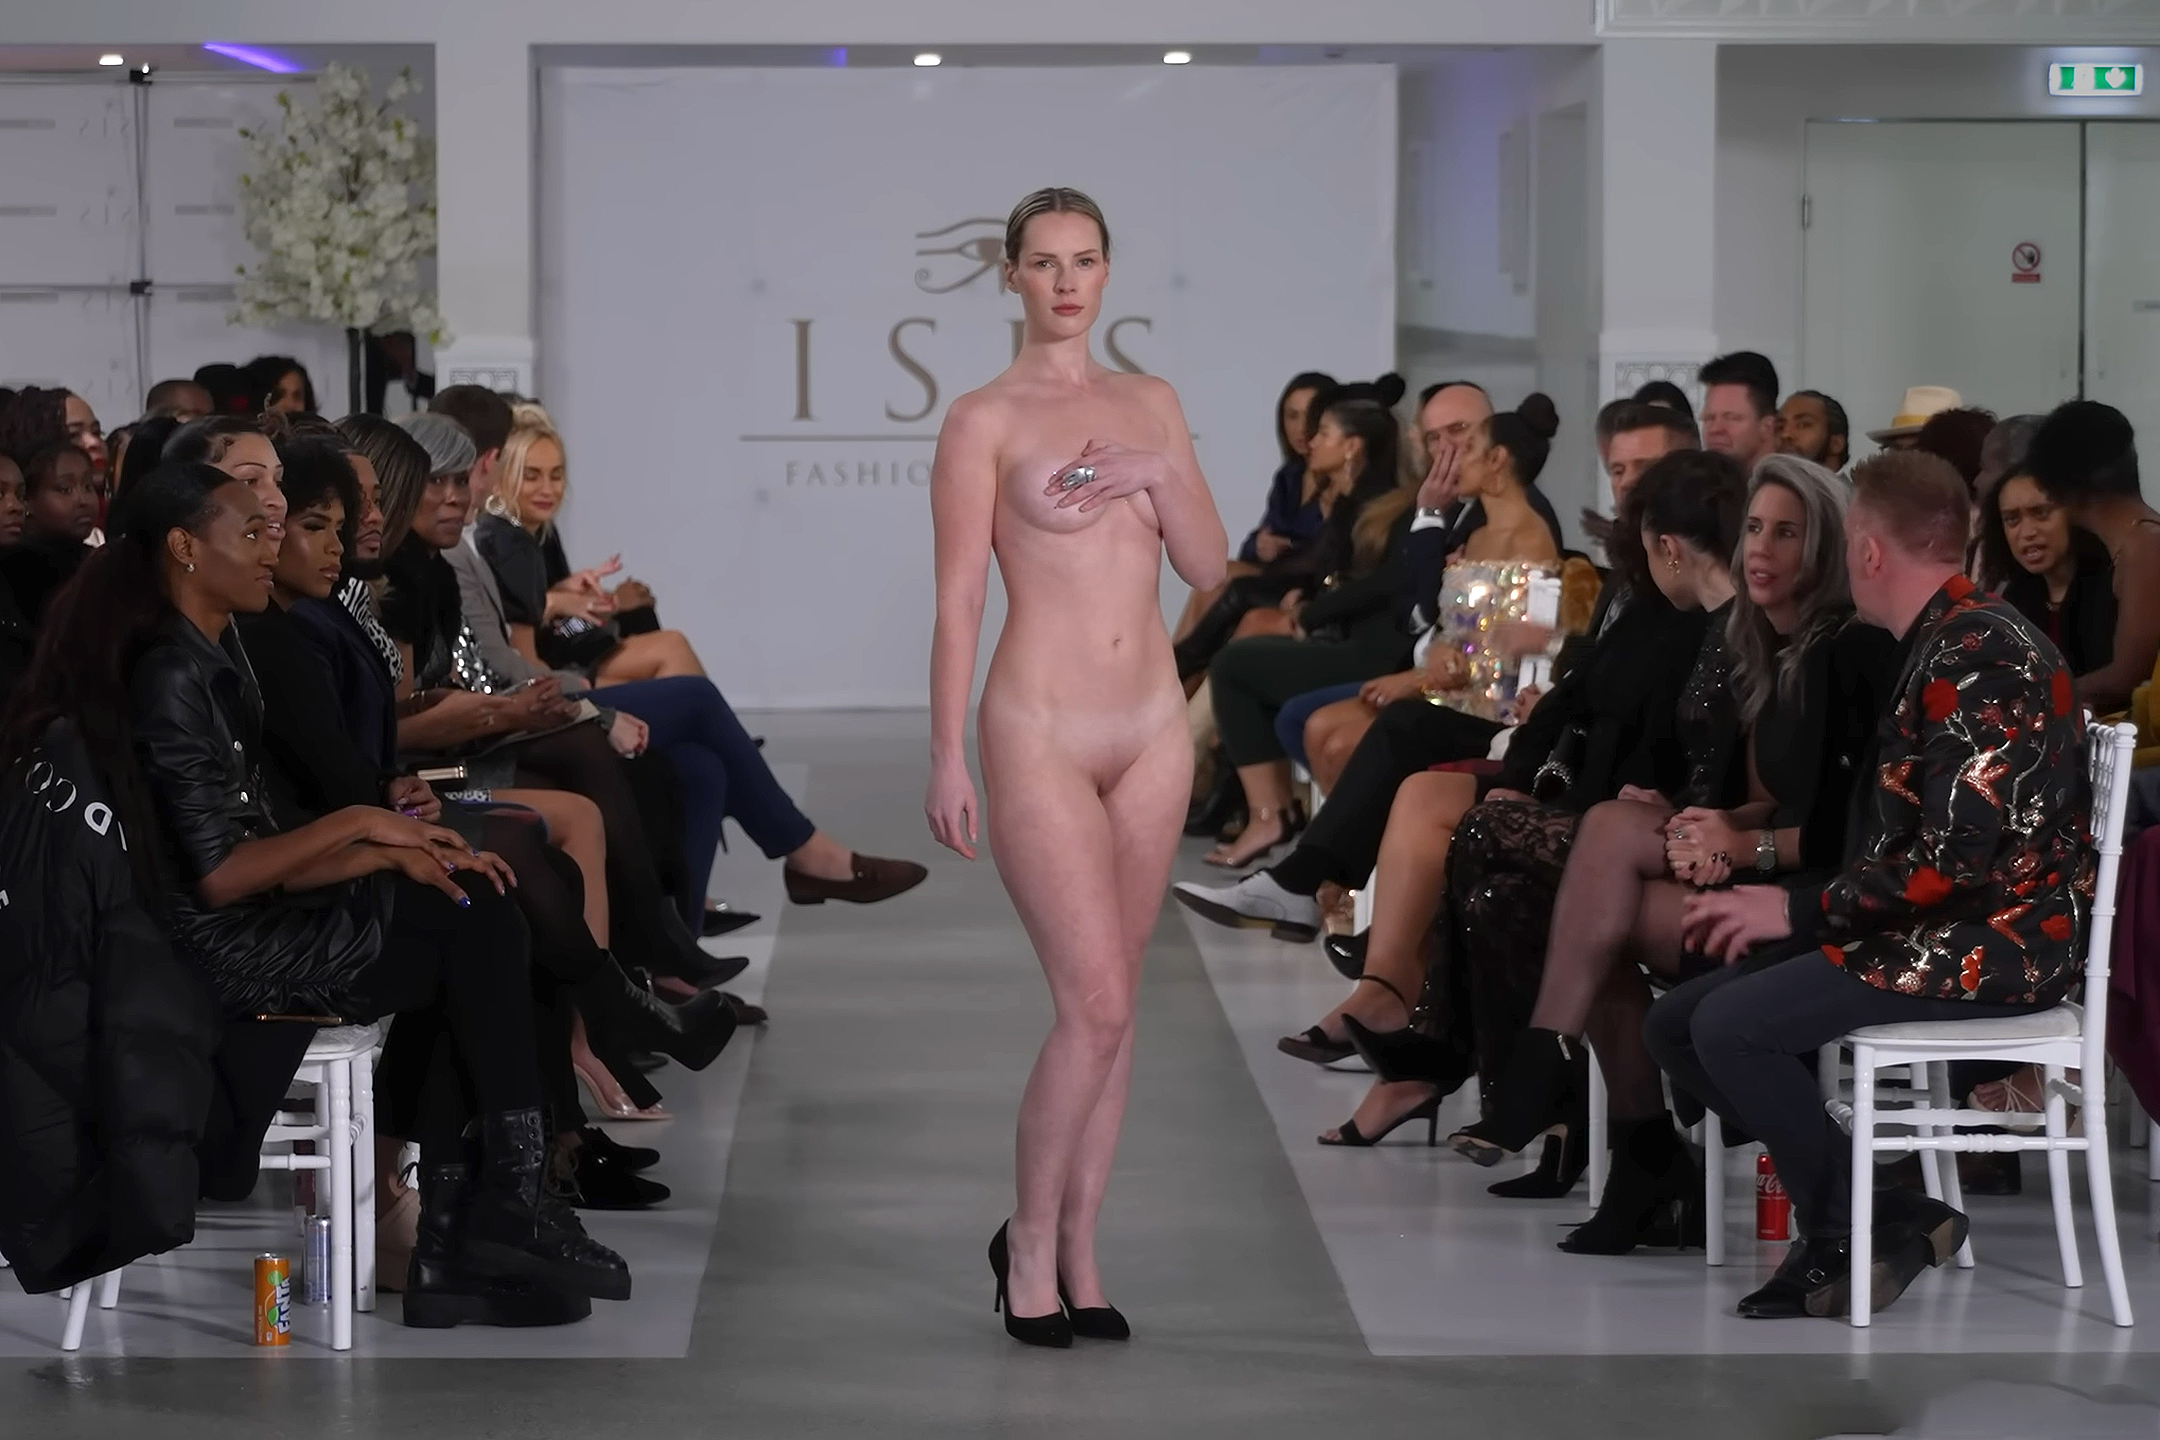 Isis Fashion Awards 2022 - Nude Accessory Runway Catwalk Show